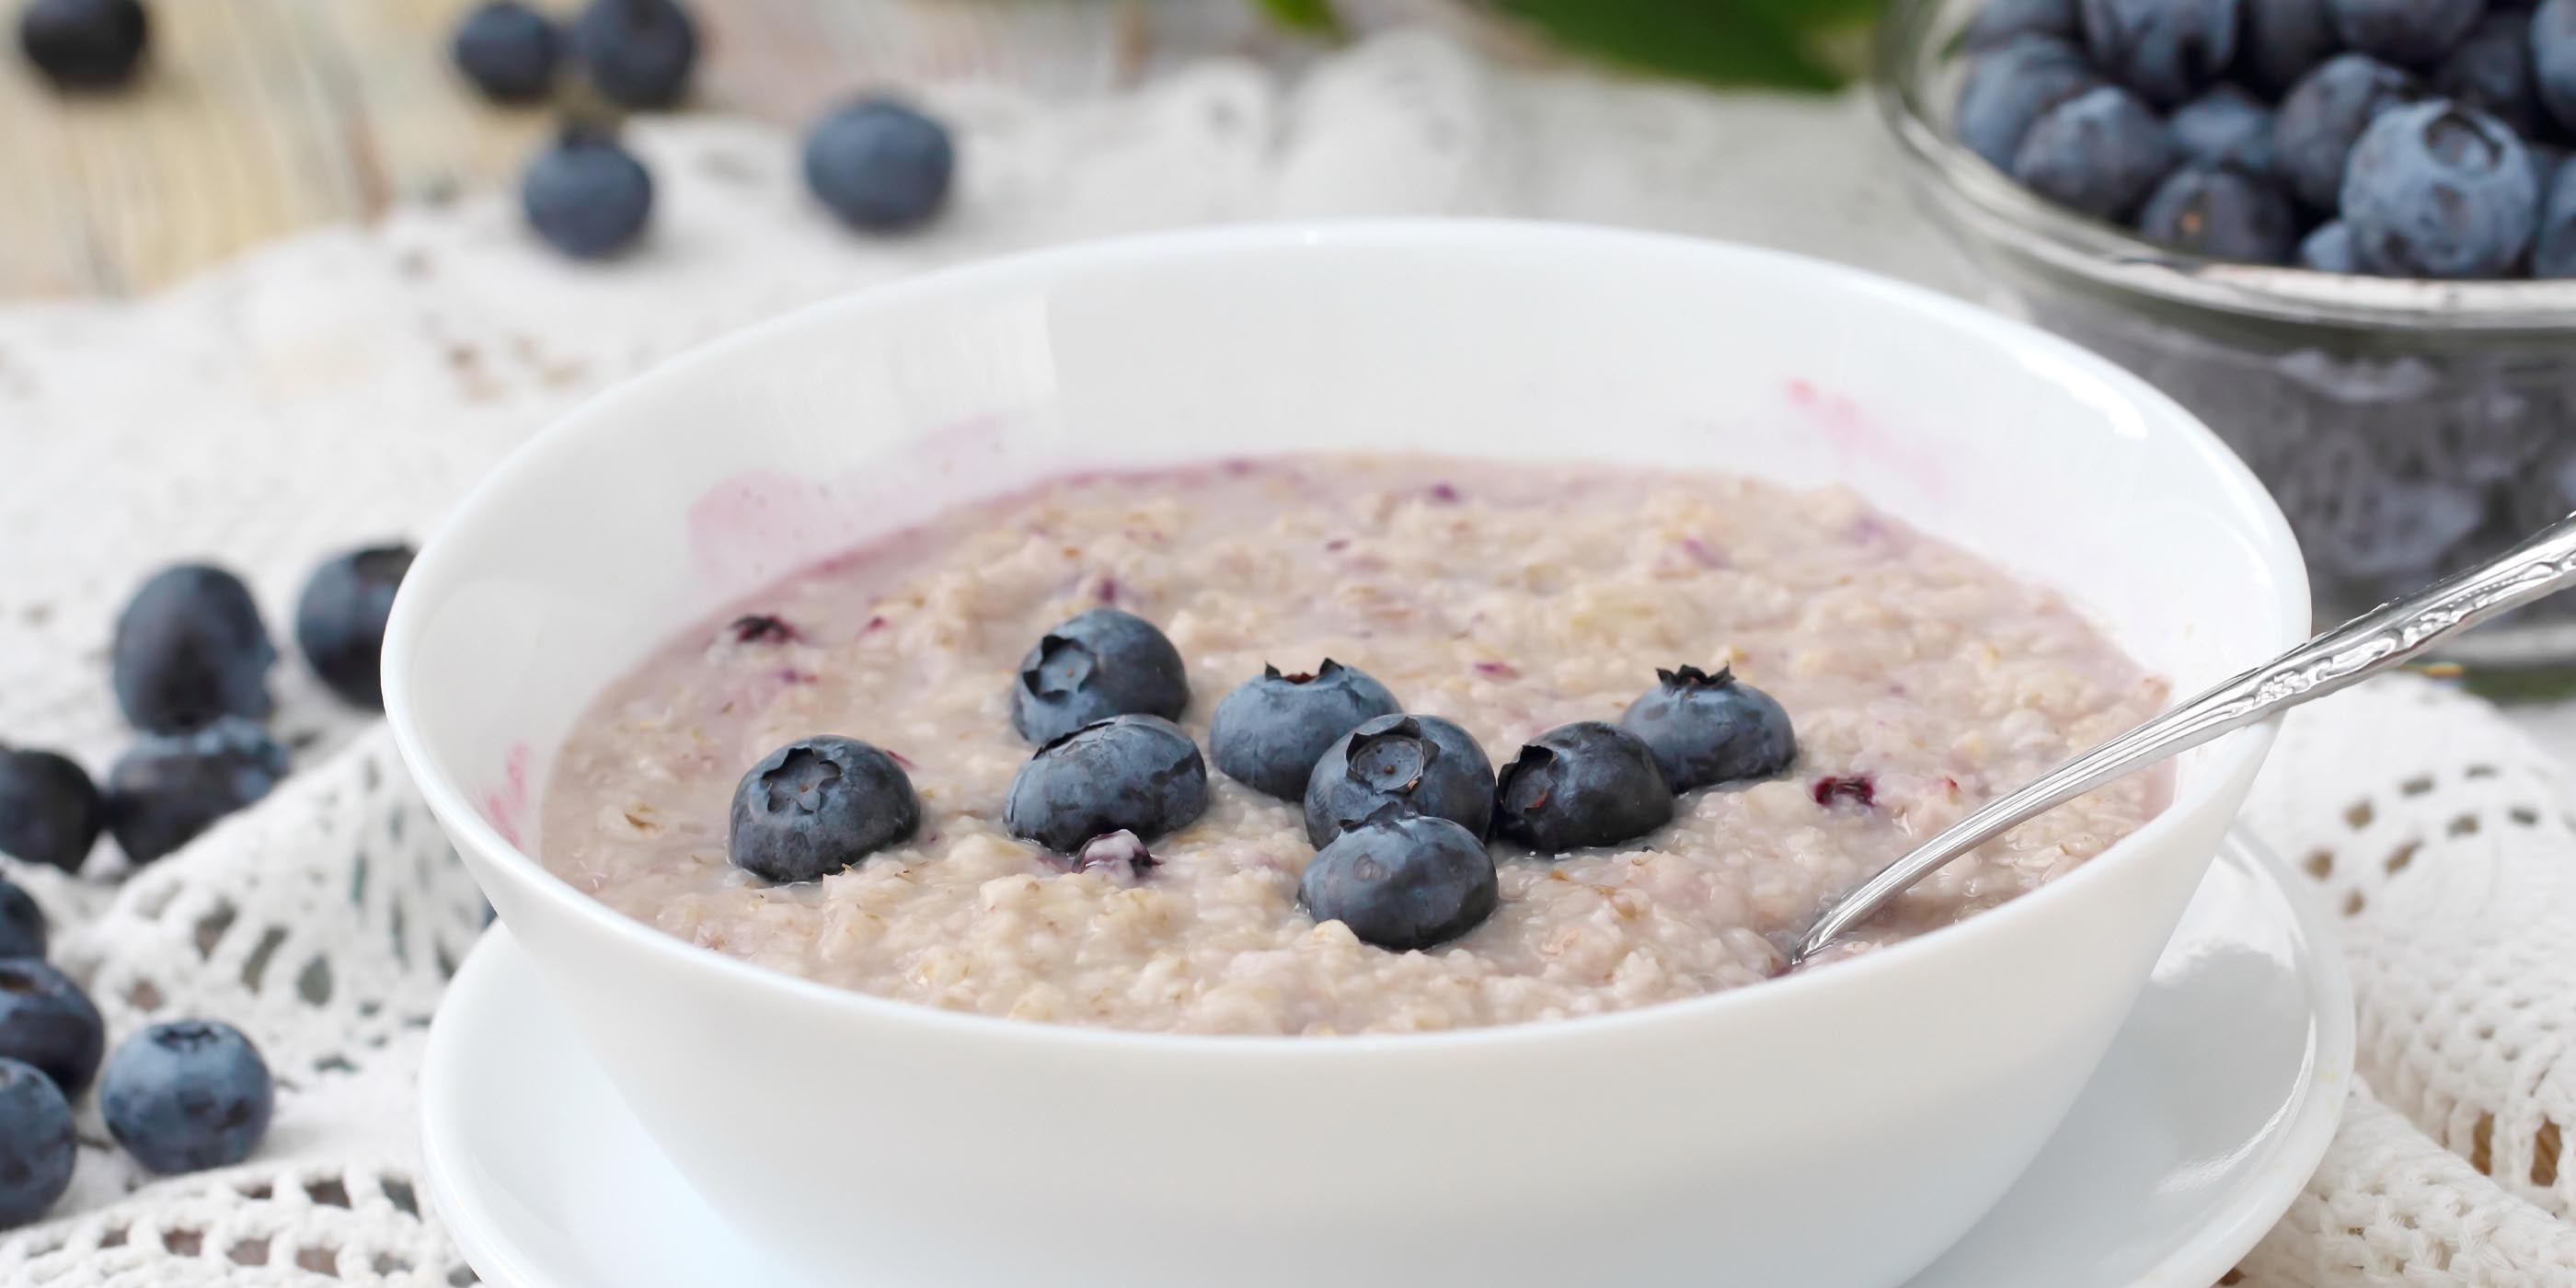 Oatmeal with Blueberries and Cream